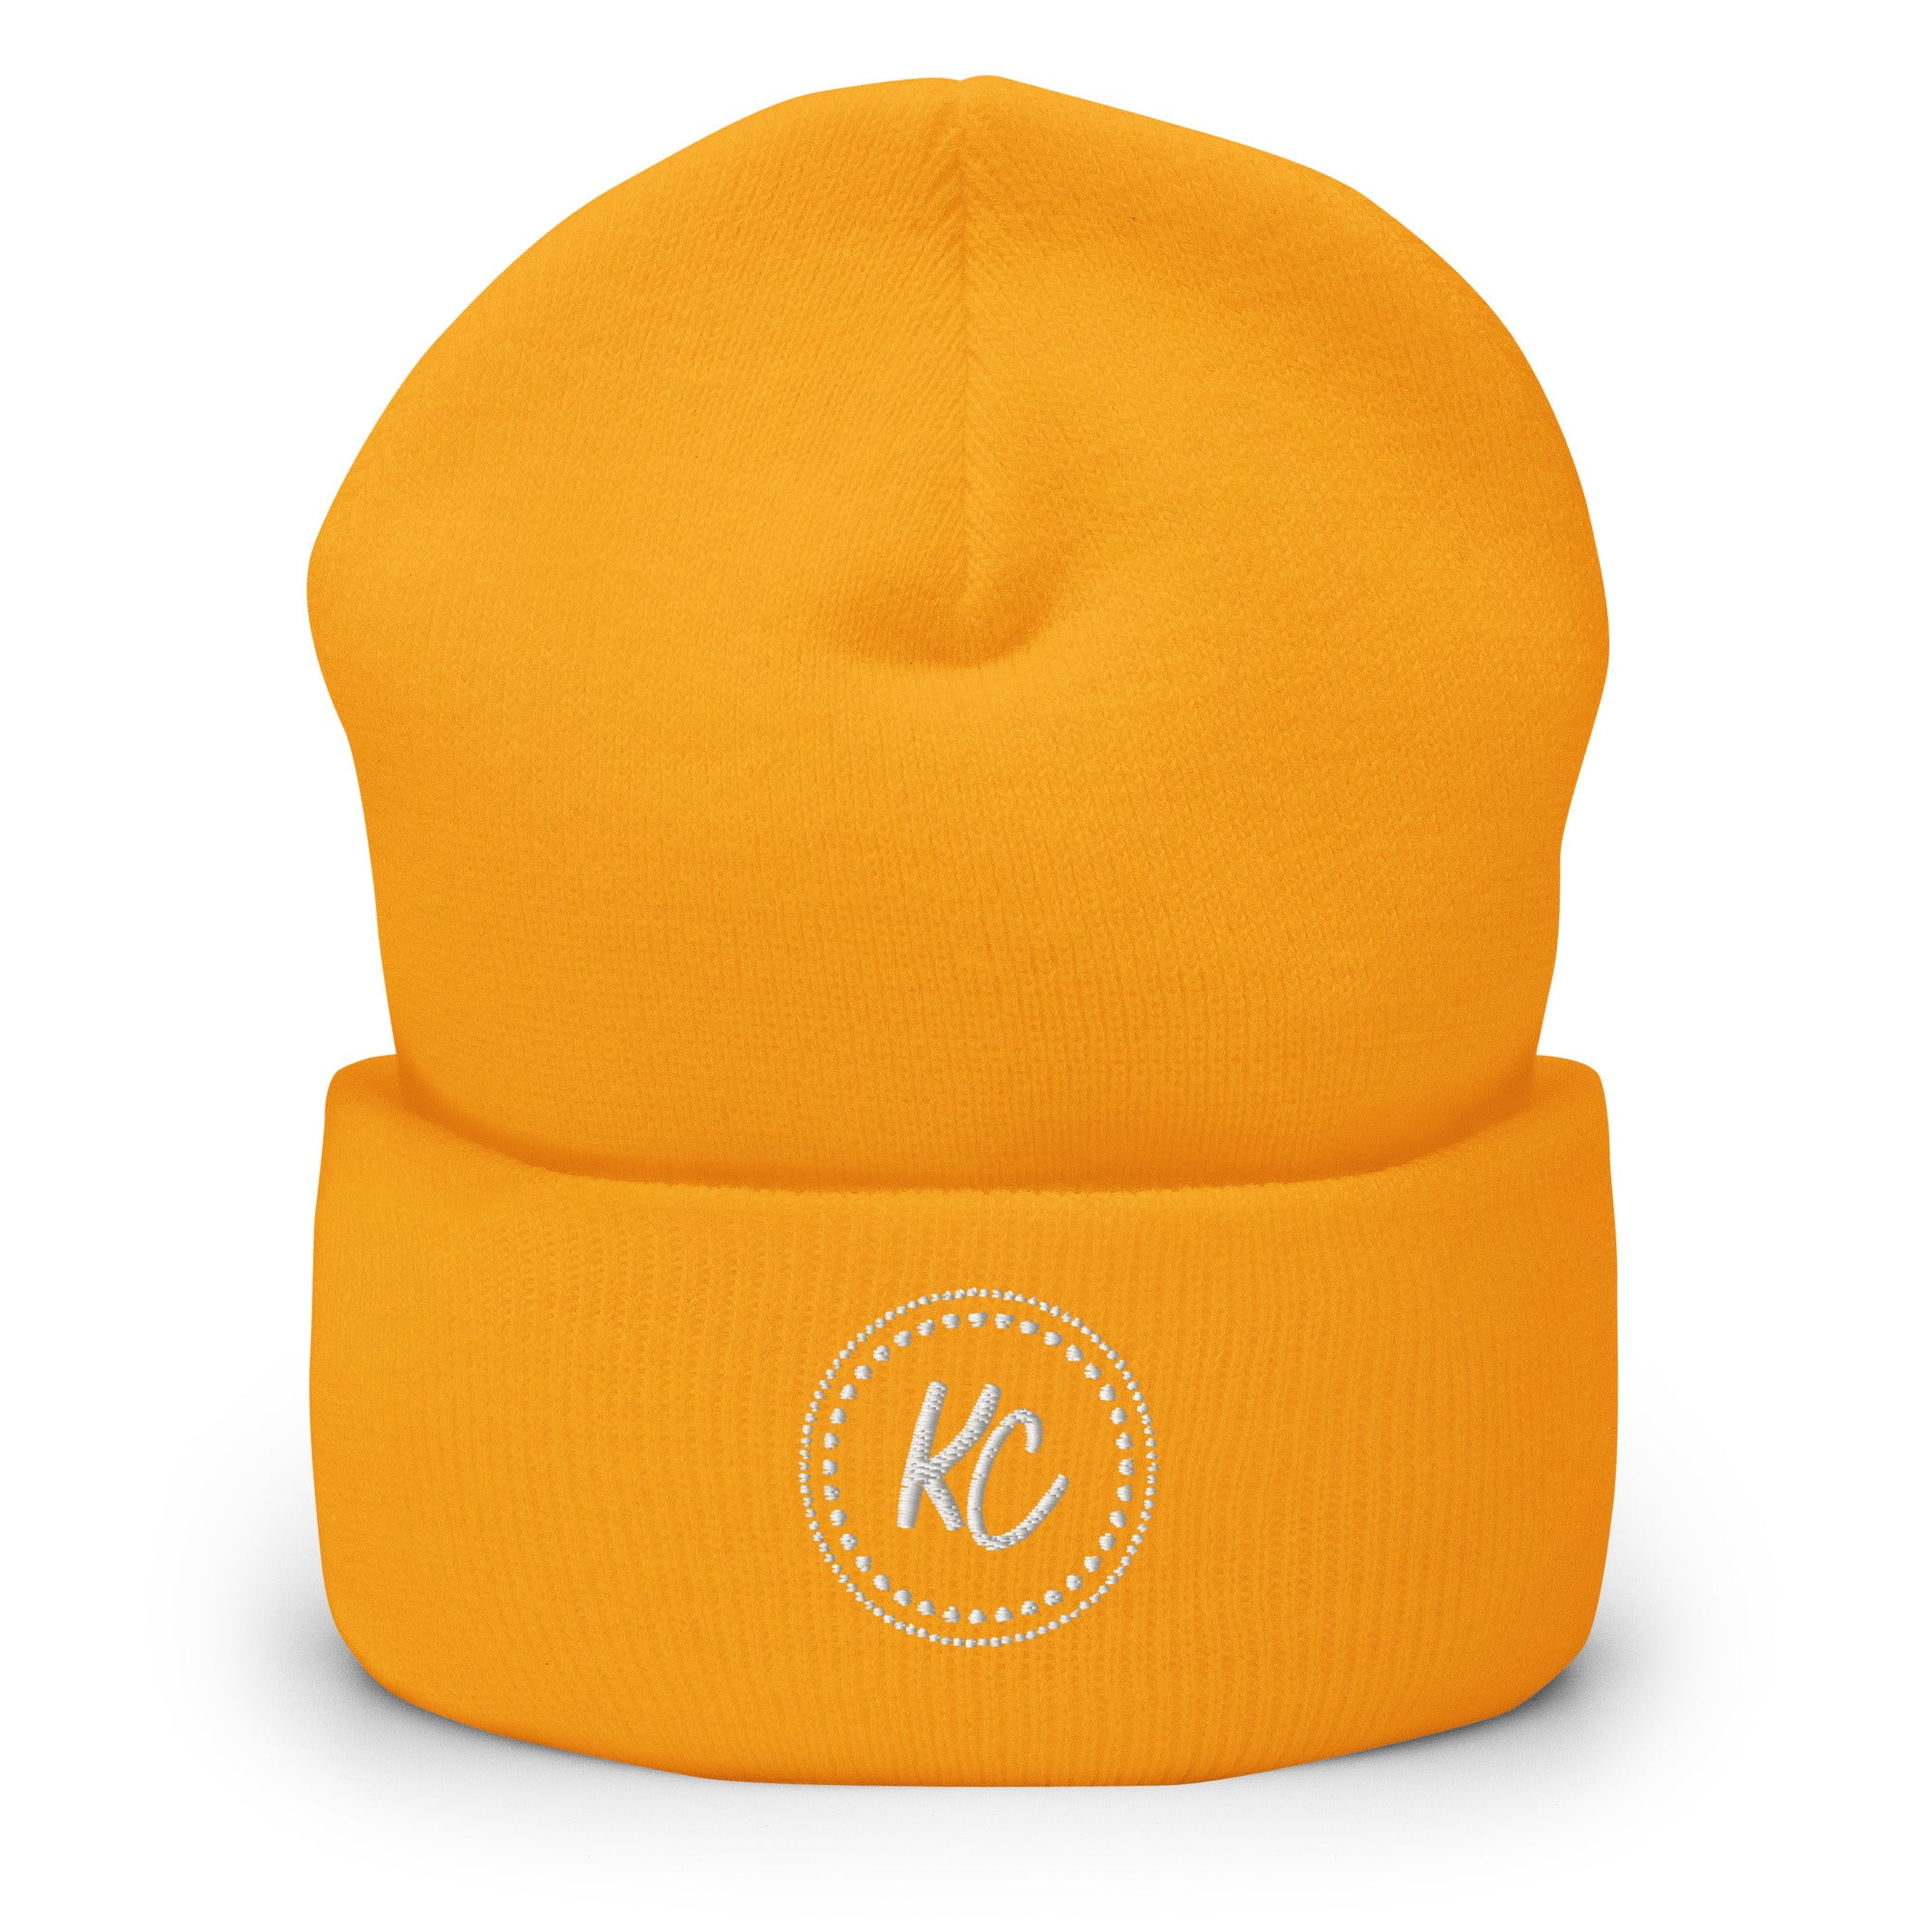 KC Embroidered Cuffed Beanie